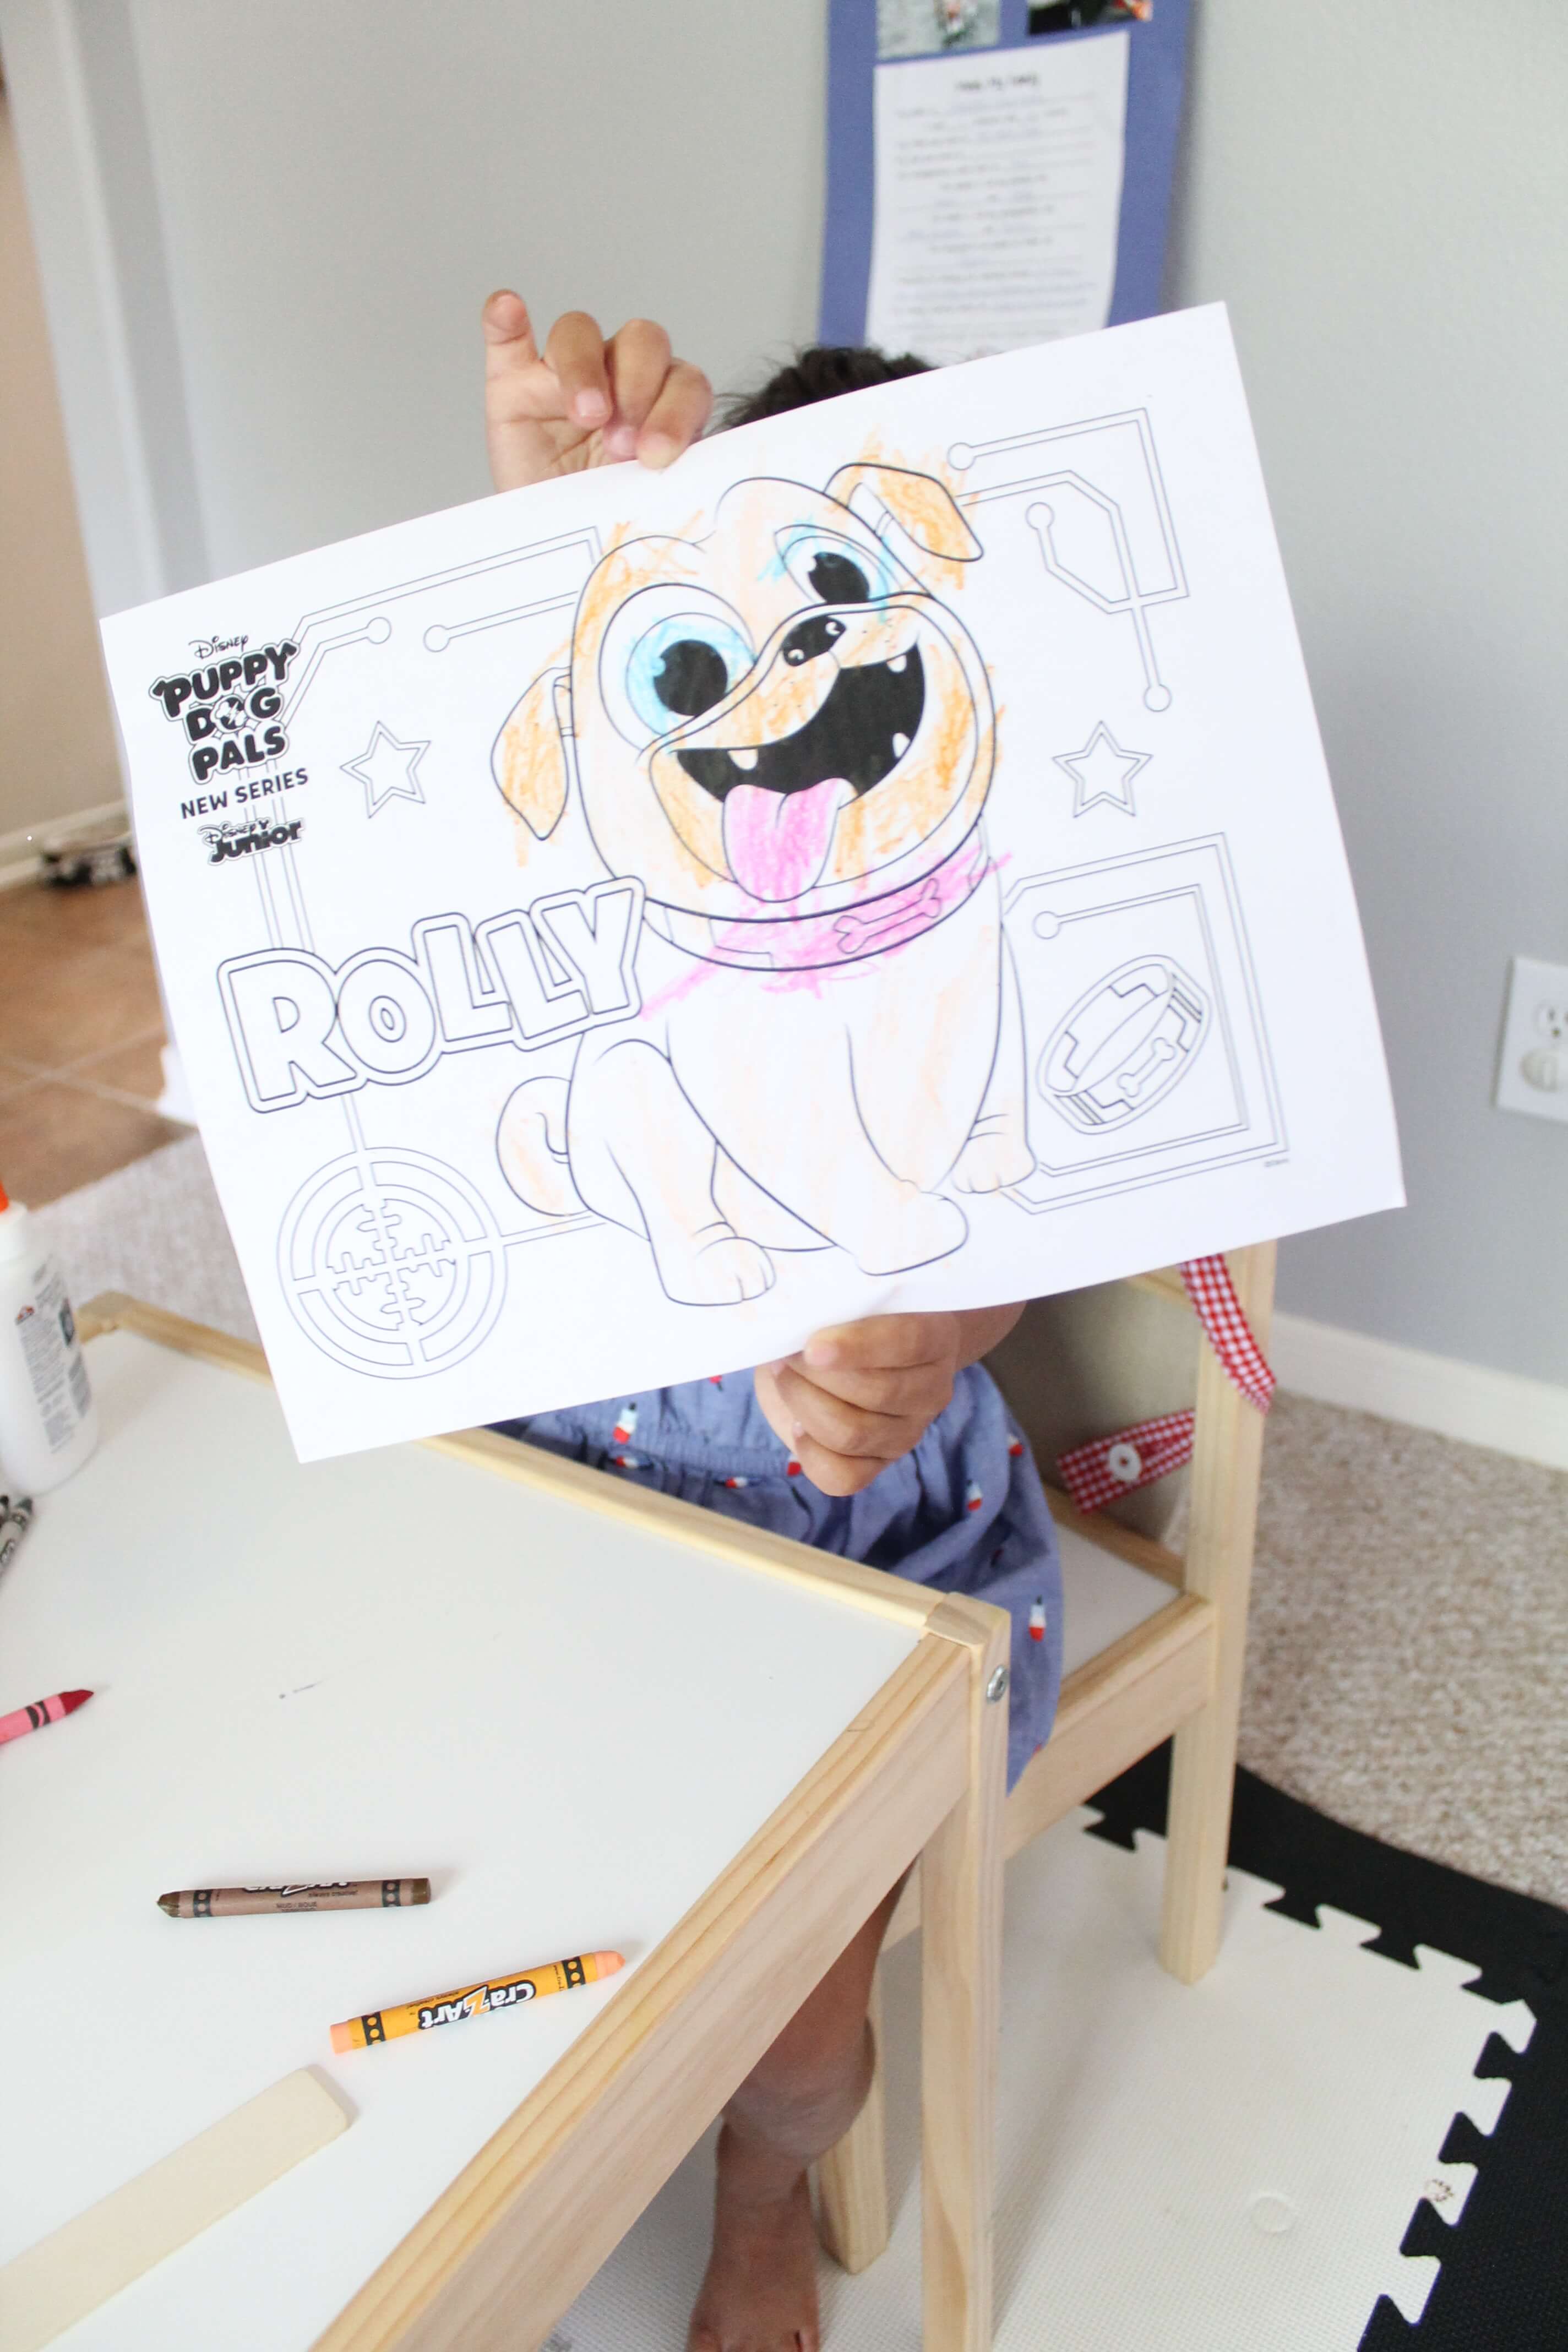 AD] The perfect summertime DIY and summer craft for rainy day fun or indoor rest time. Make Rolly & Bingo come to life from the new Disney Junior Puppy Dog Pals. 